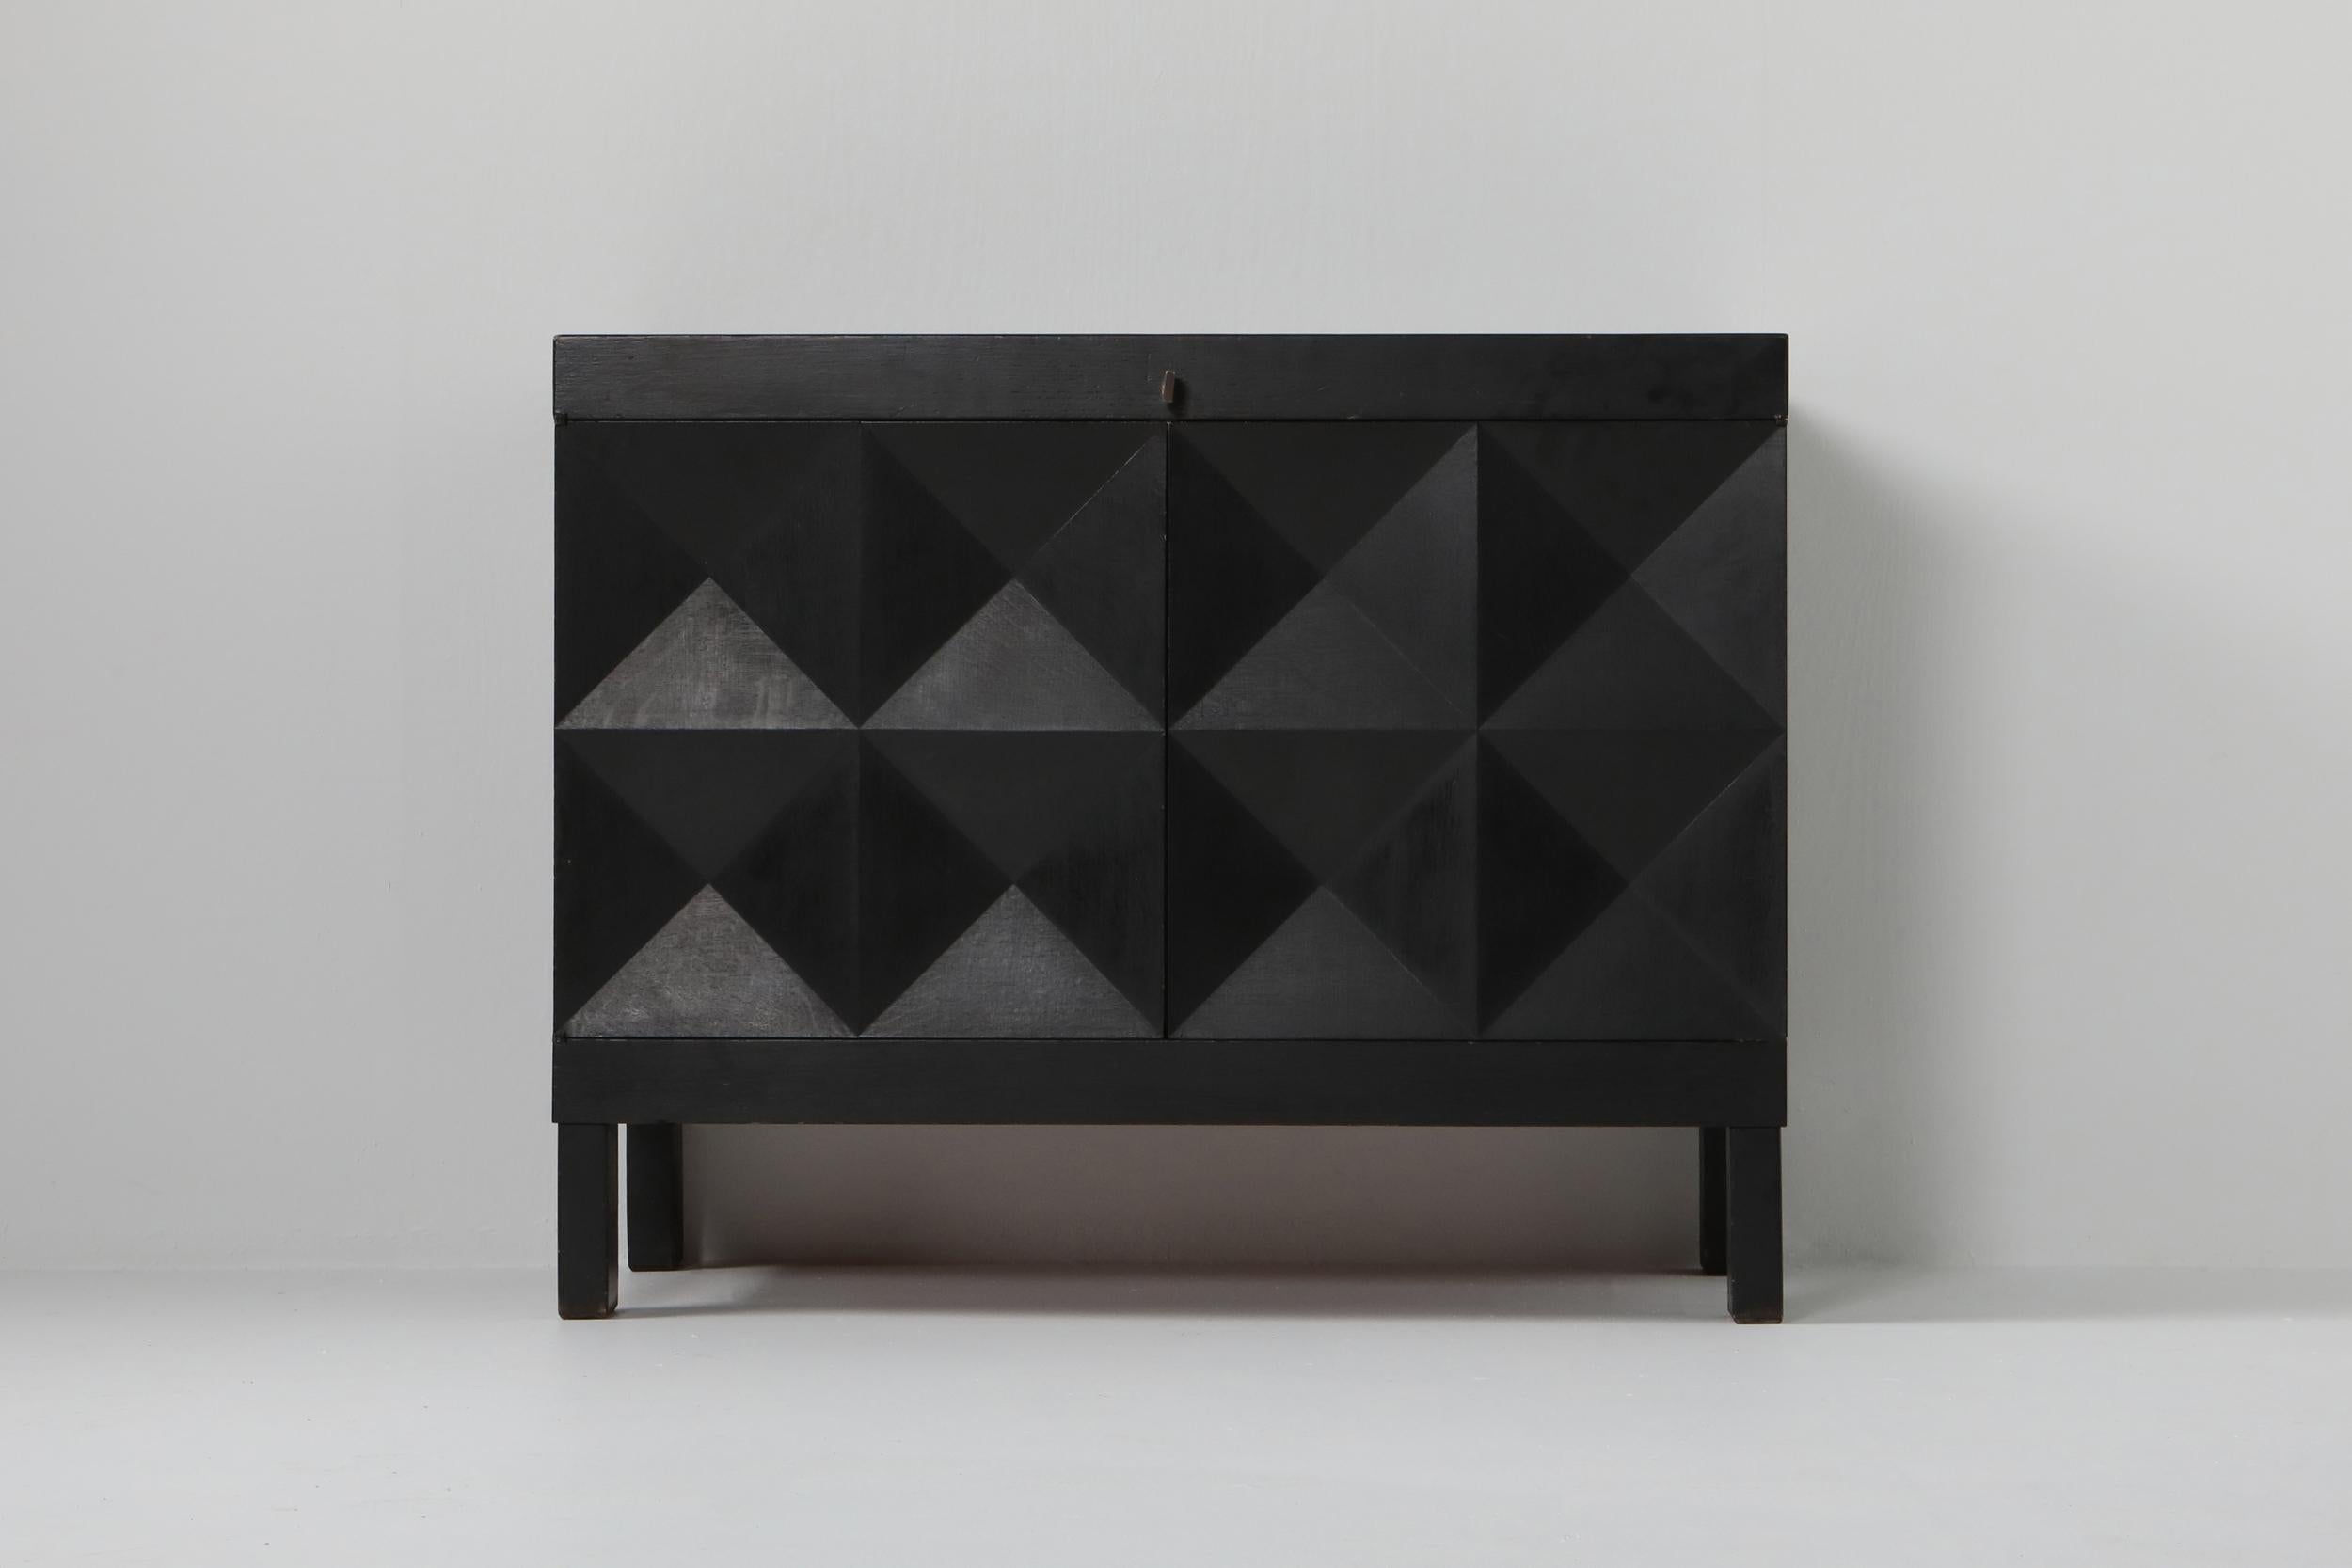 Geometrical dry bar, De Coene Belgium, ebonized oak, 1970s



De Coene was founded in 1887 in Kortrijk (Belgium) by Jozef de Coene, who was at that time 13 years old. In 1895 his younger brother Adolphe joined the company. In their early years